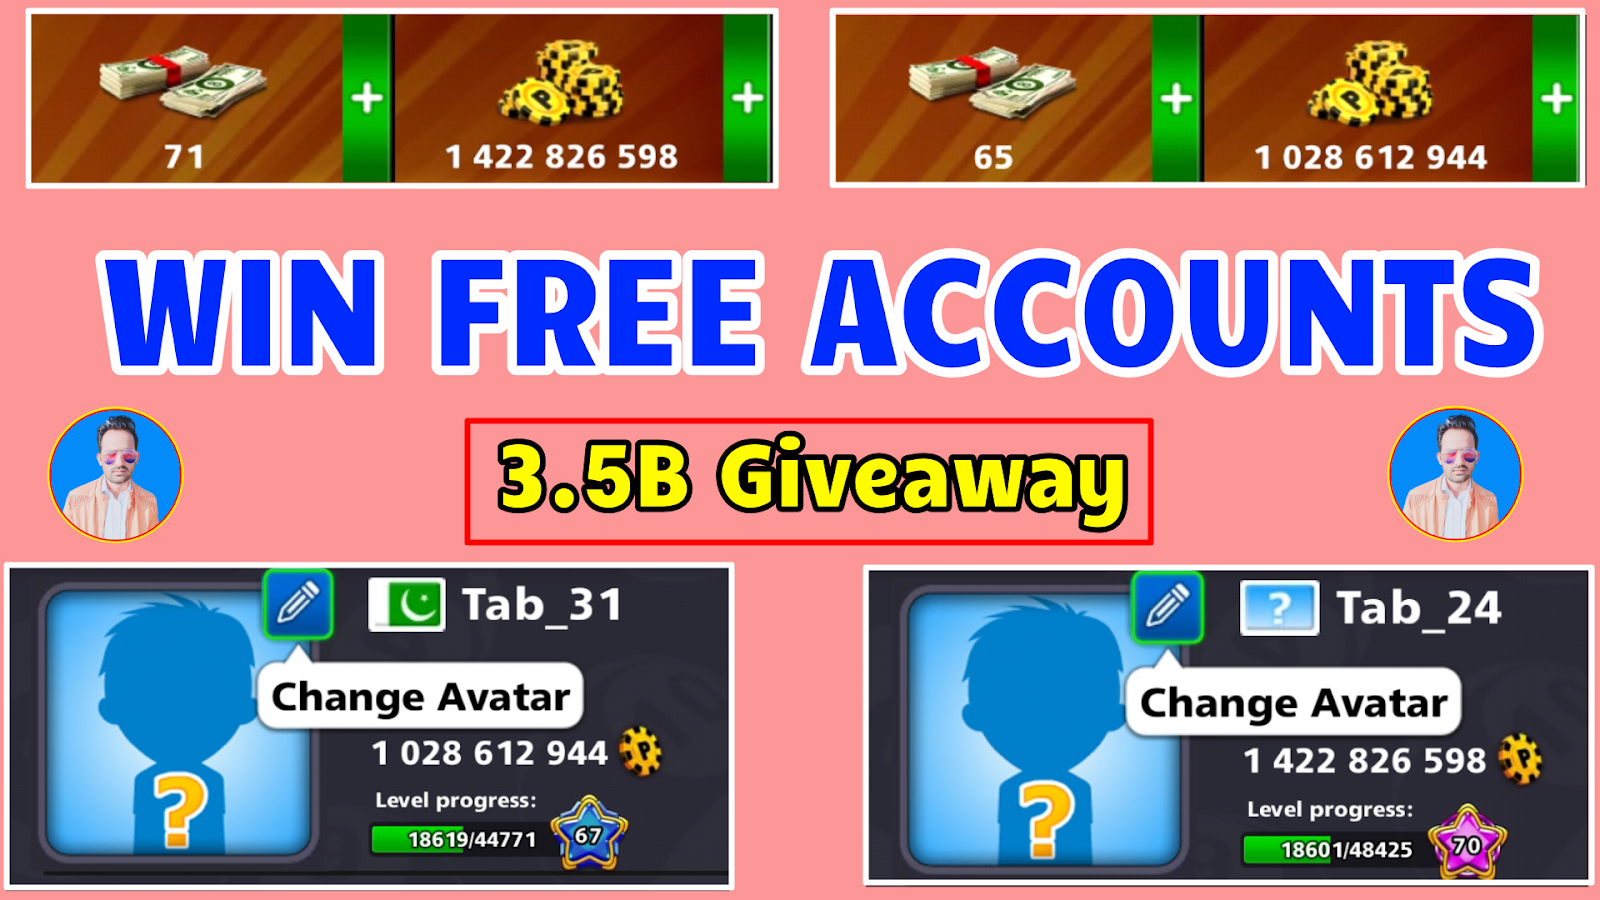 8 BALL POOL FREE 2.5 Billion Coins Account Giveaway